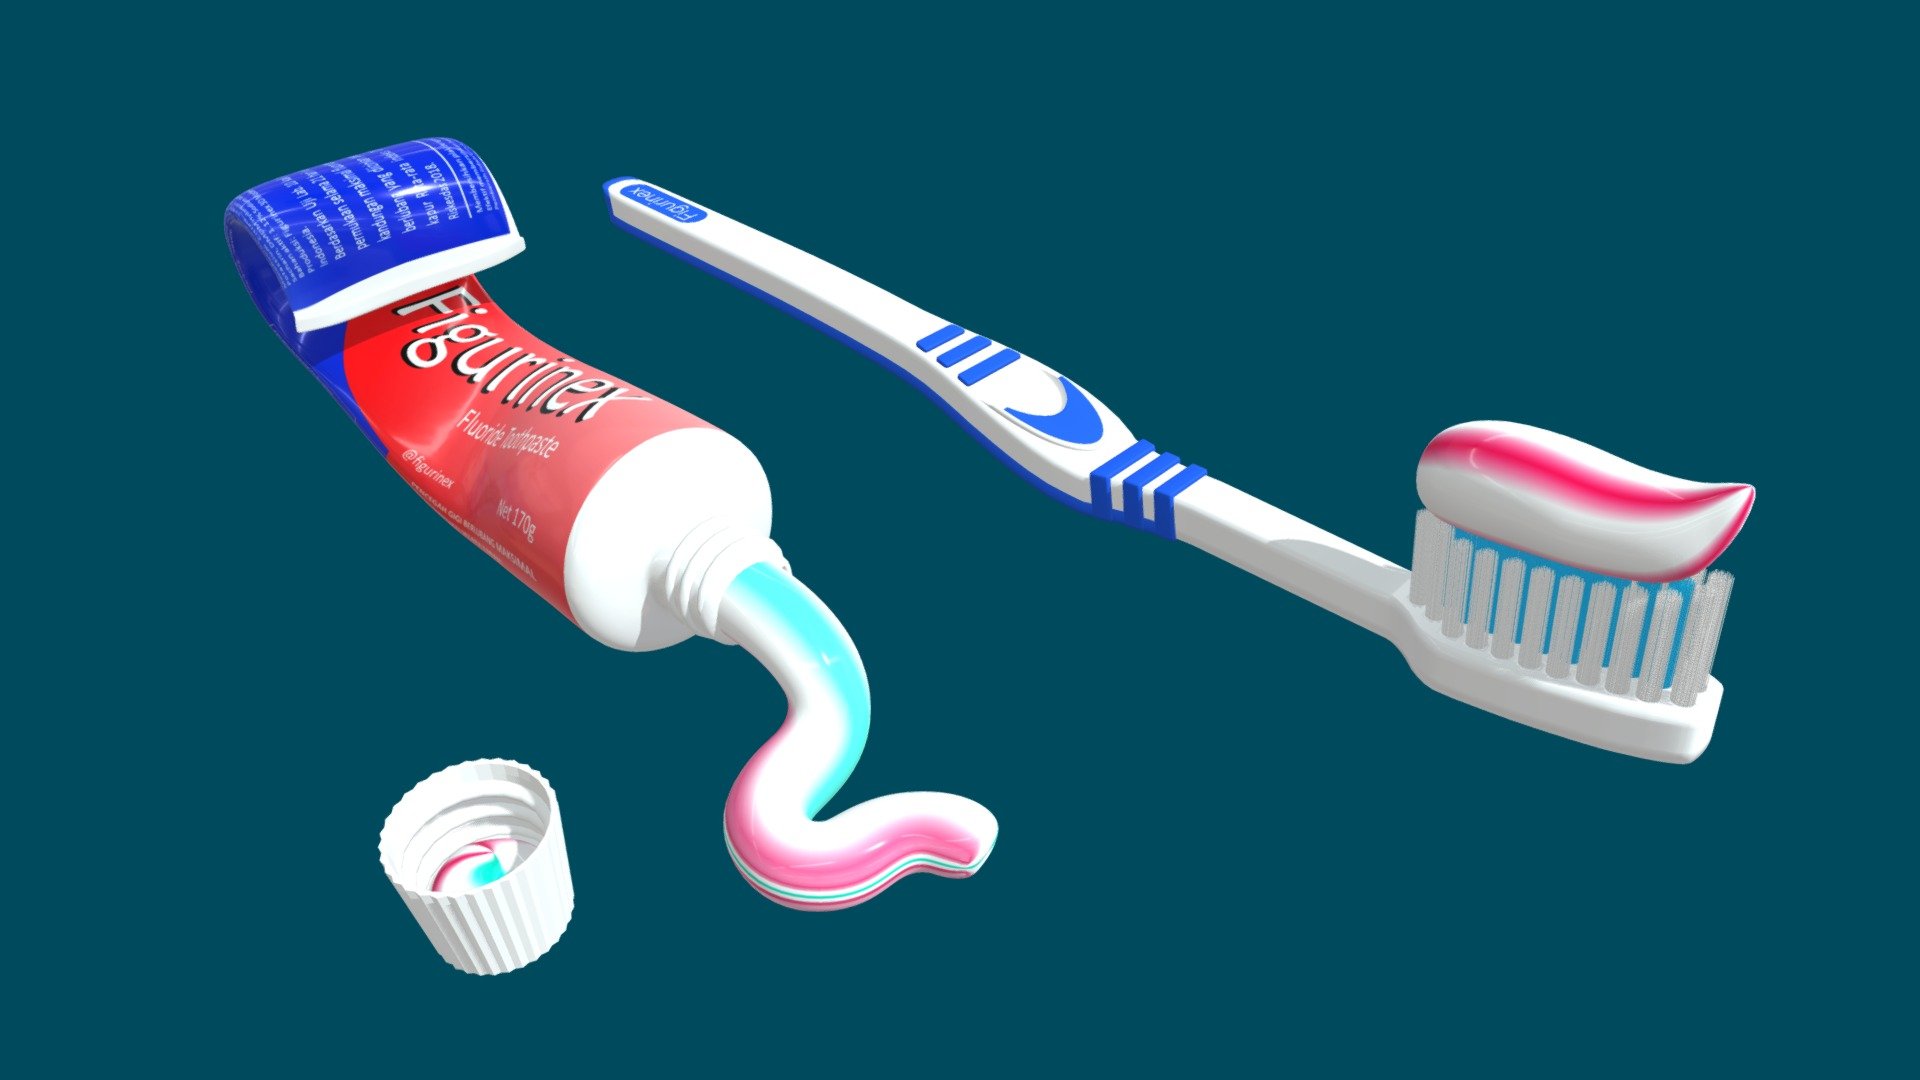 Toothpaste and Toothbrush 002

Real Shape 3d Model.

The 3d model is created in Blender 3.4.1

Preview images are rendered in Blender, Cycles renderer.

396,856 poly

471,408 vertices

Texture: 2600 x 4961, 2363 x 2363 JPEG

The 3d model can be used as property in interior design, architectural design, game development, special event, mascot of products, action figure, 3d printing, or other needs.

Instagram: figoorin

The 3d model created by Yuprita R 3d model